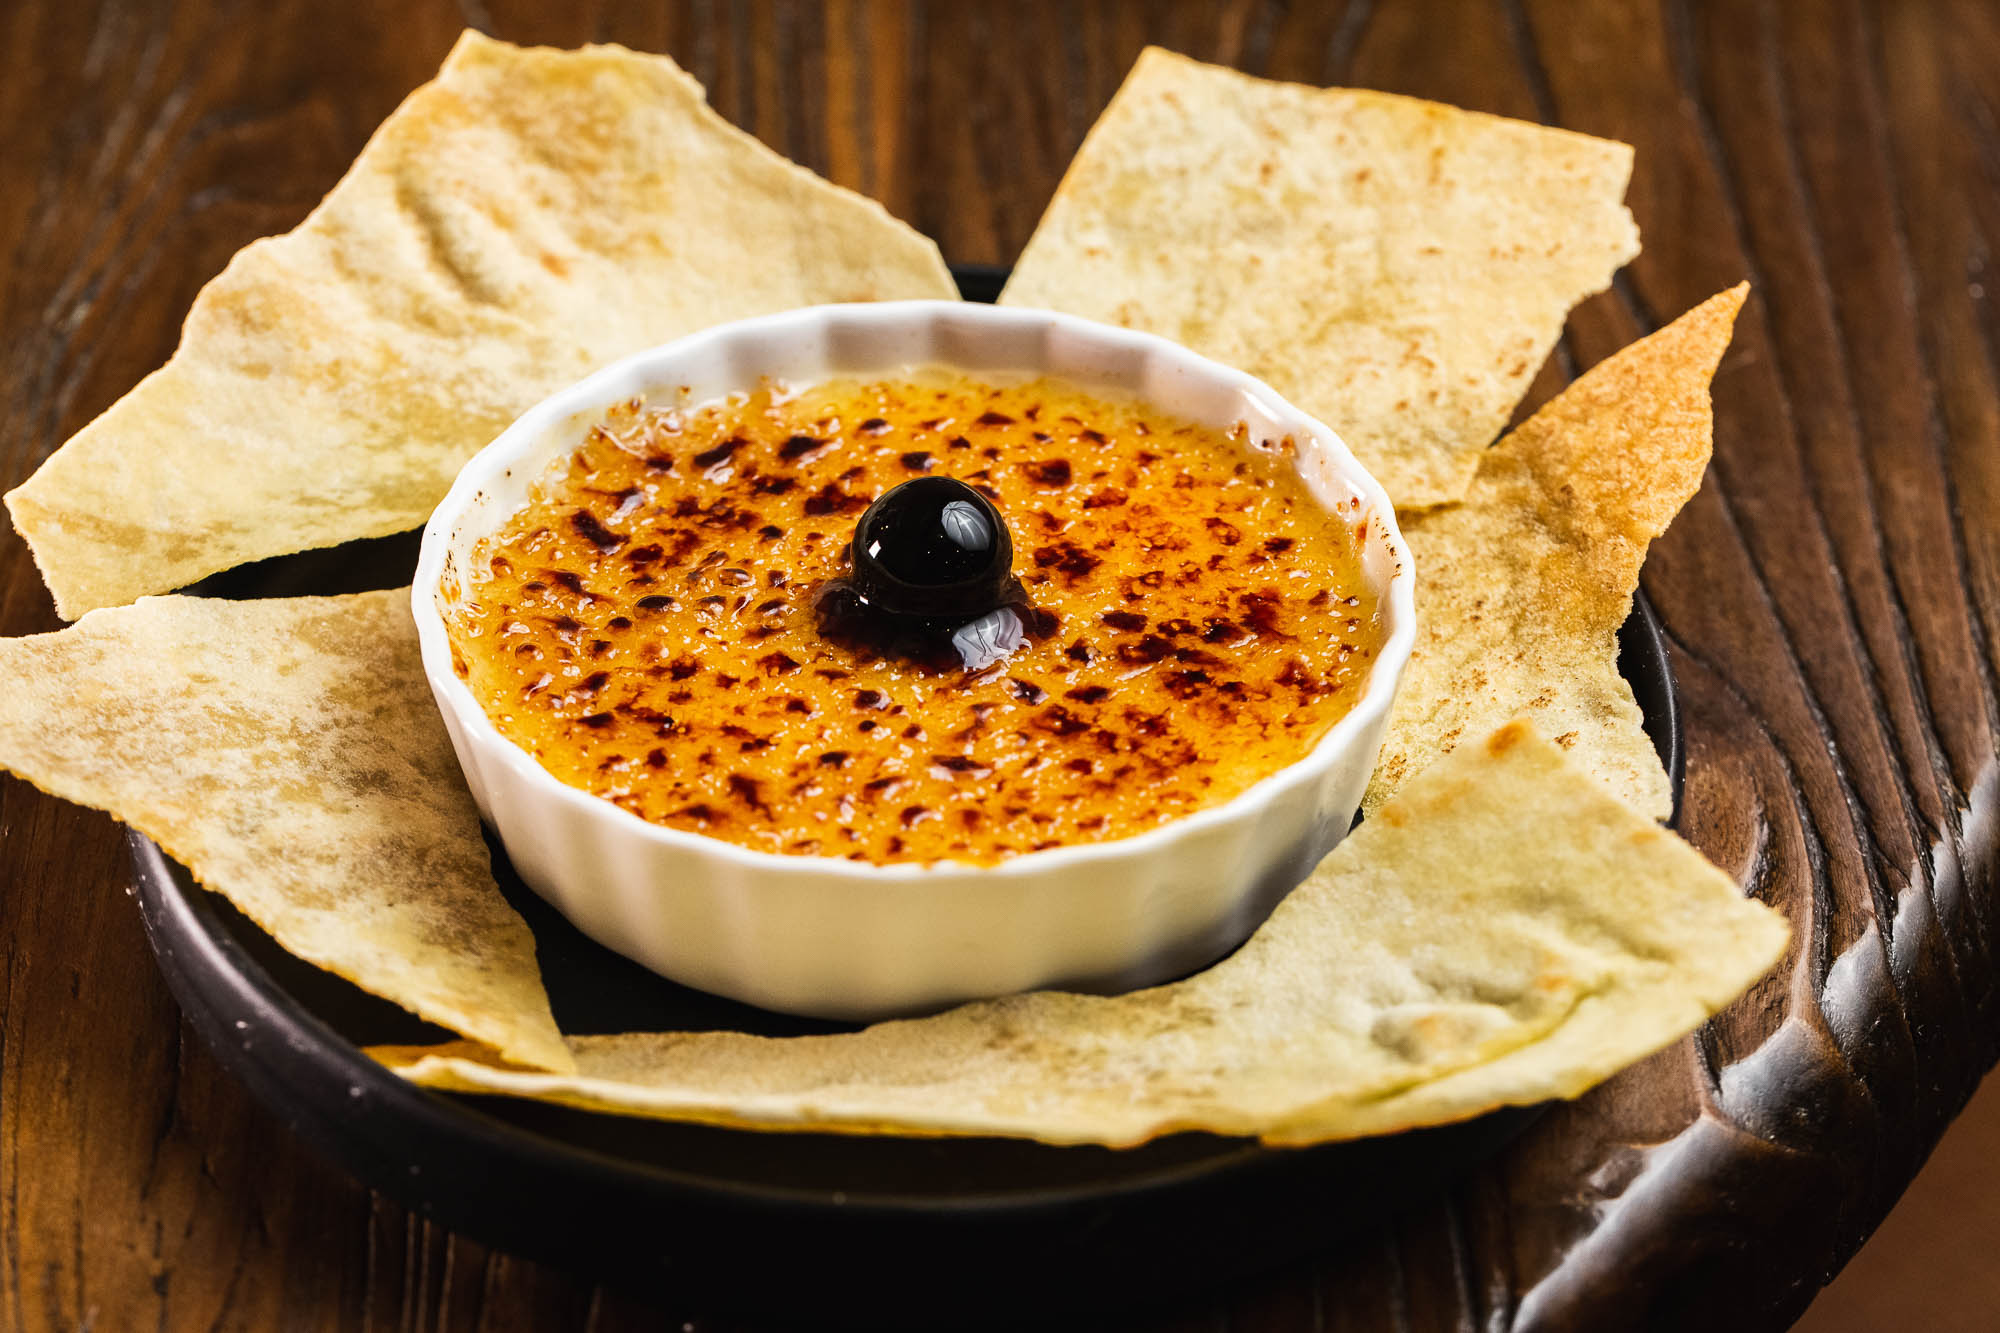 Creme Brulee served with chips